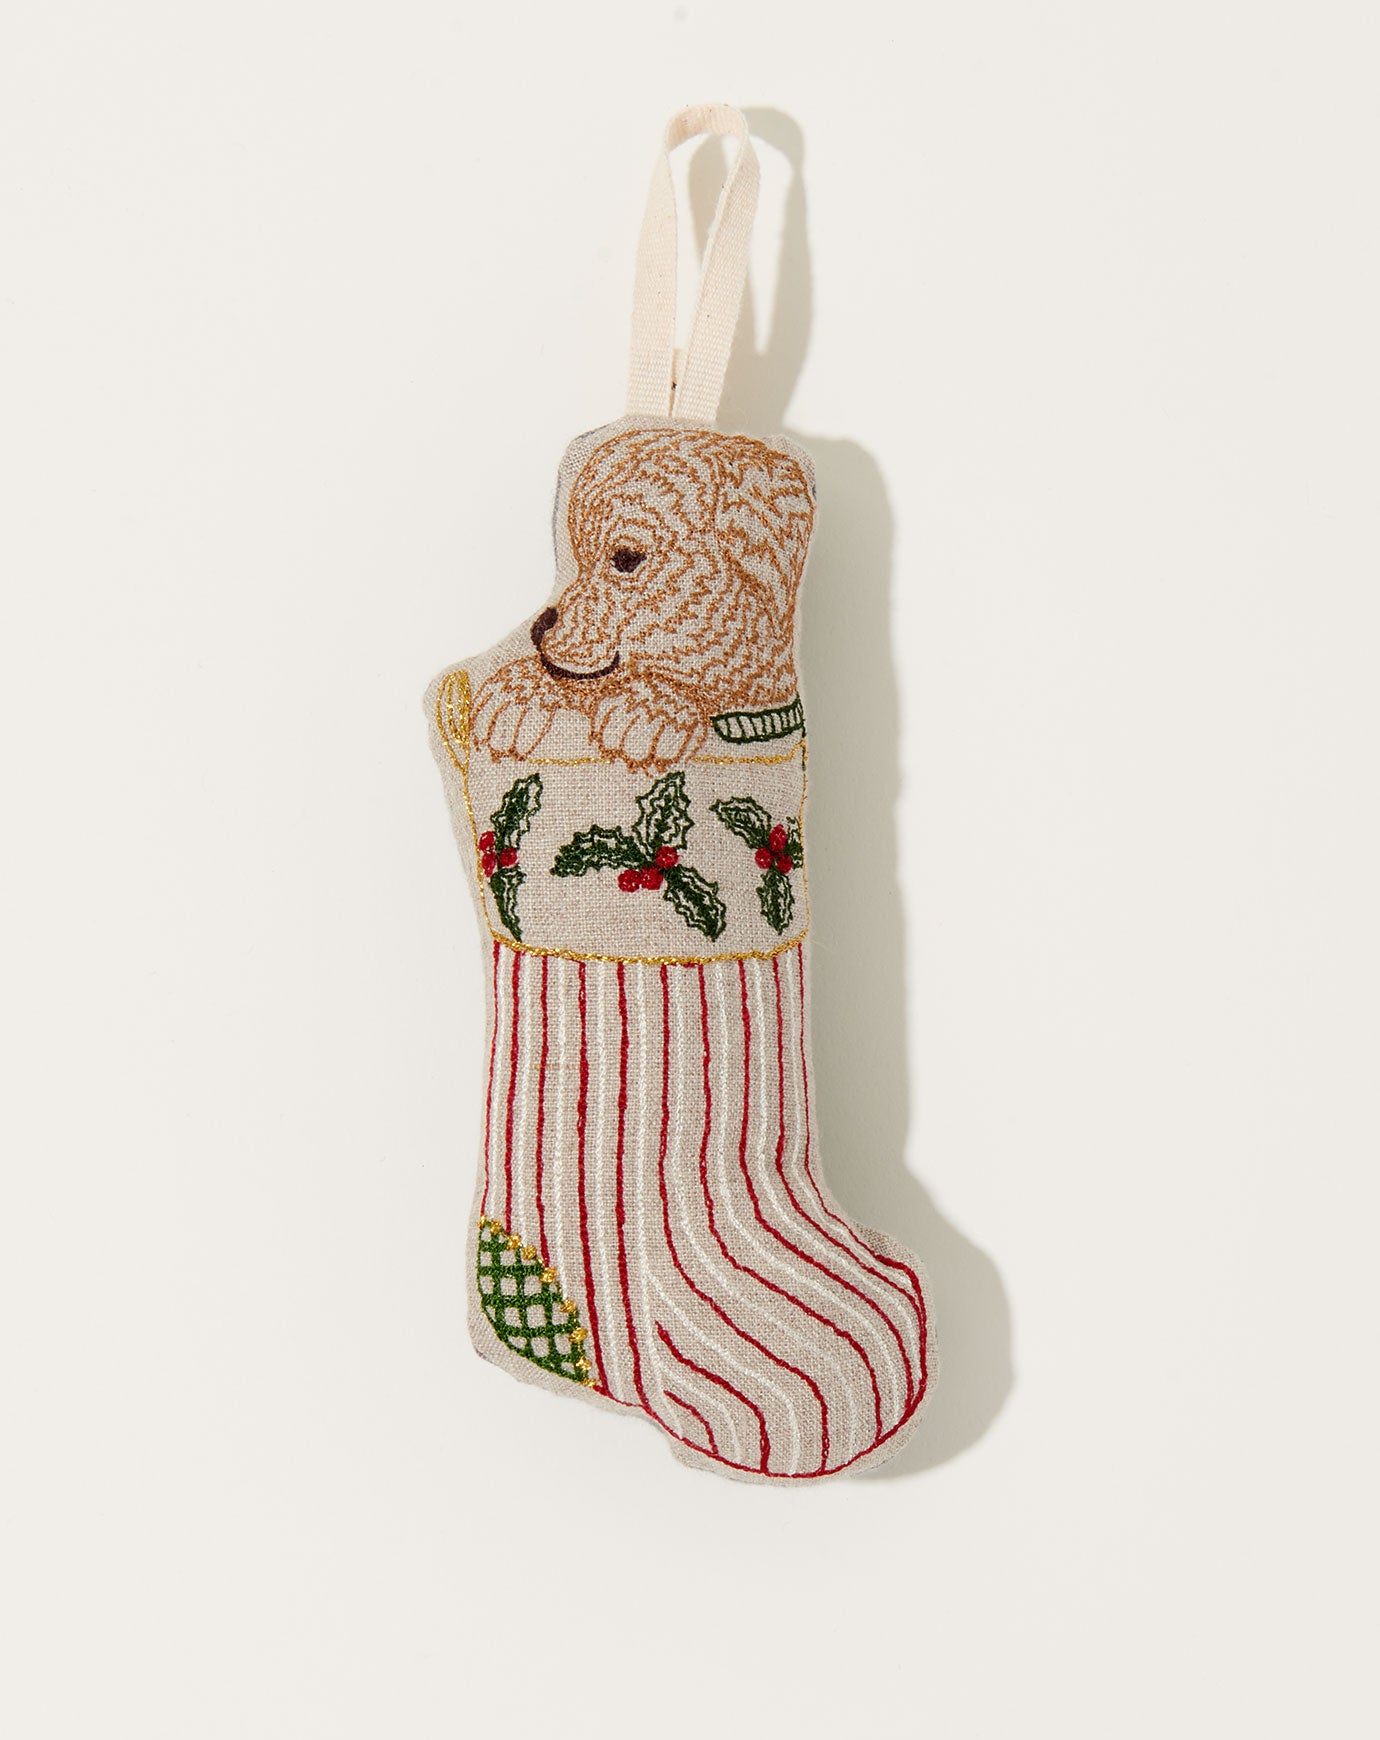 Coral & Tusk Puppy Stocking Ornament